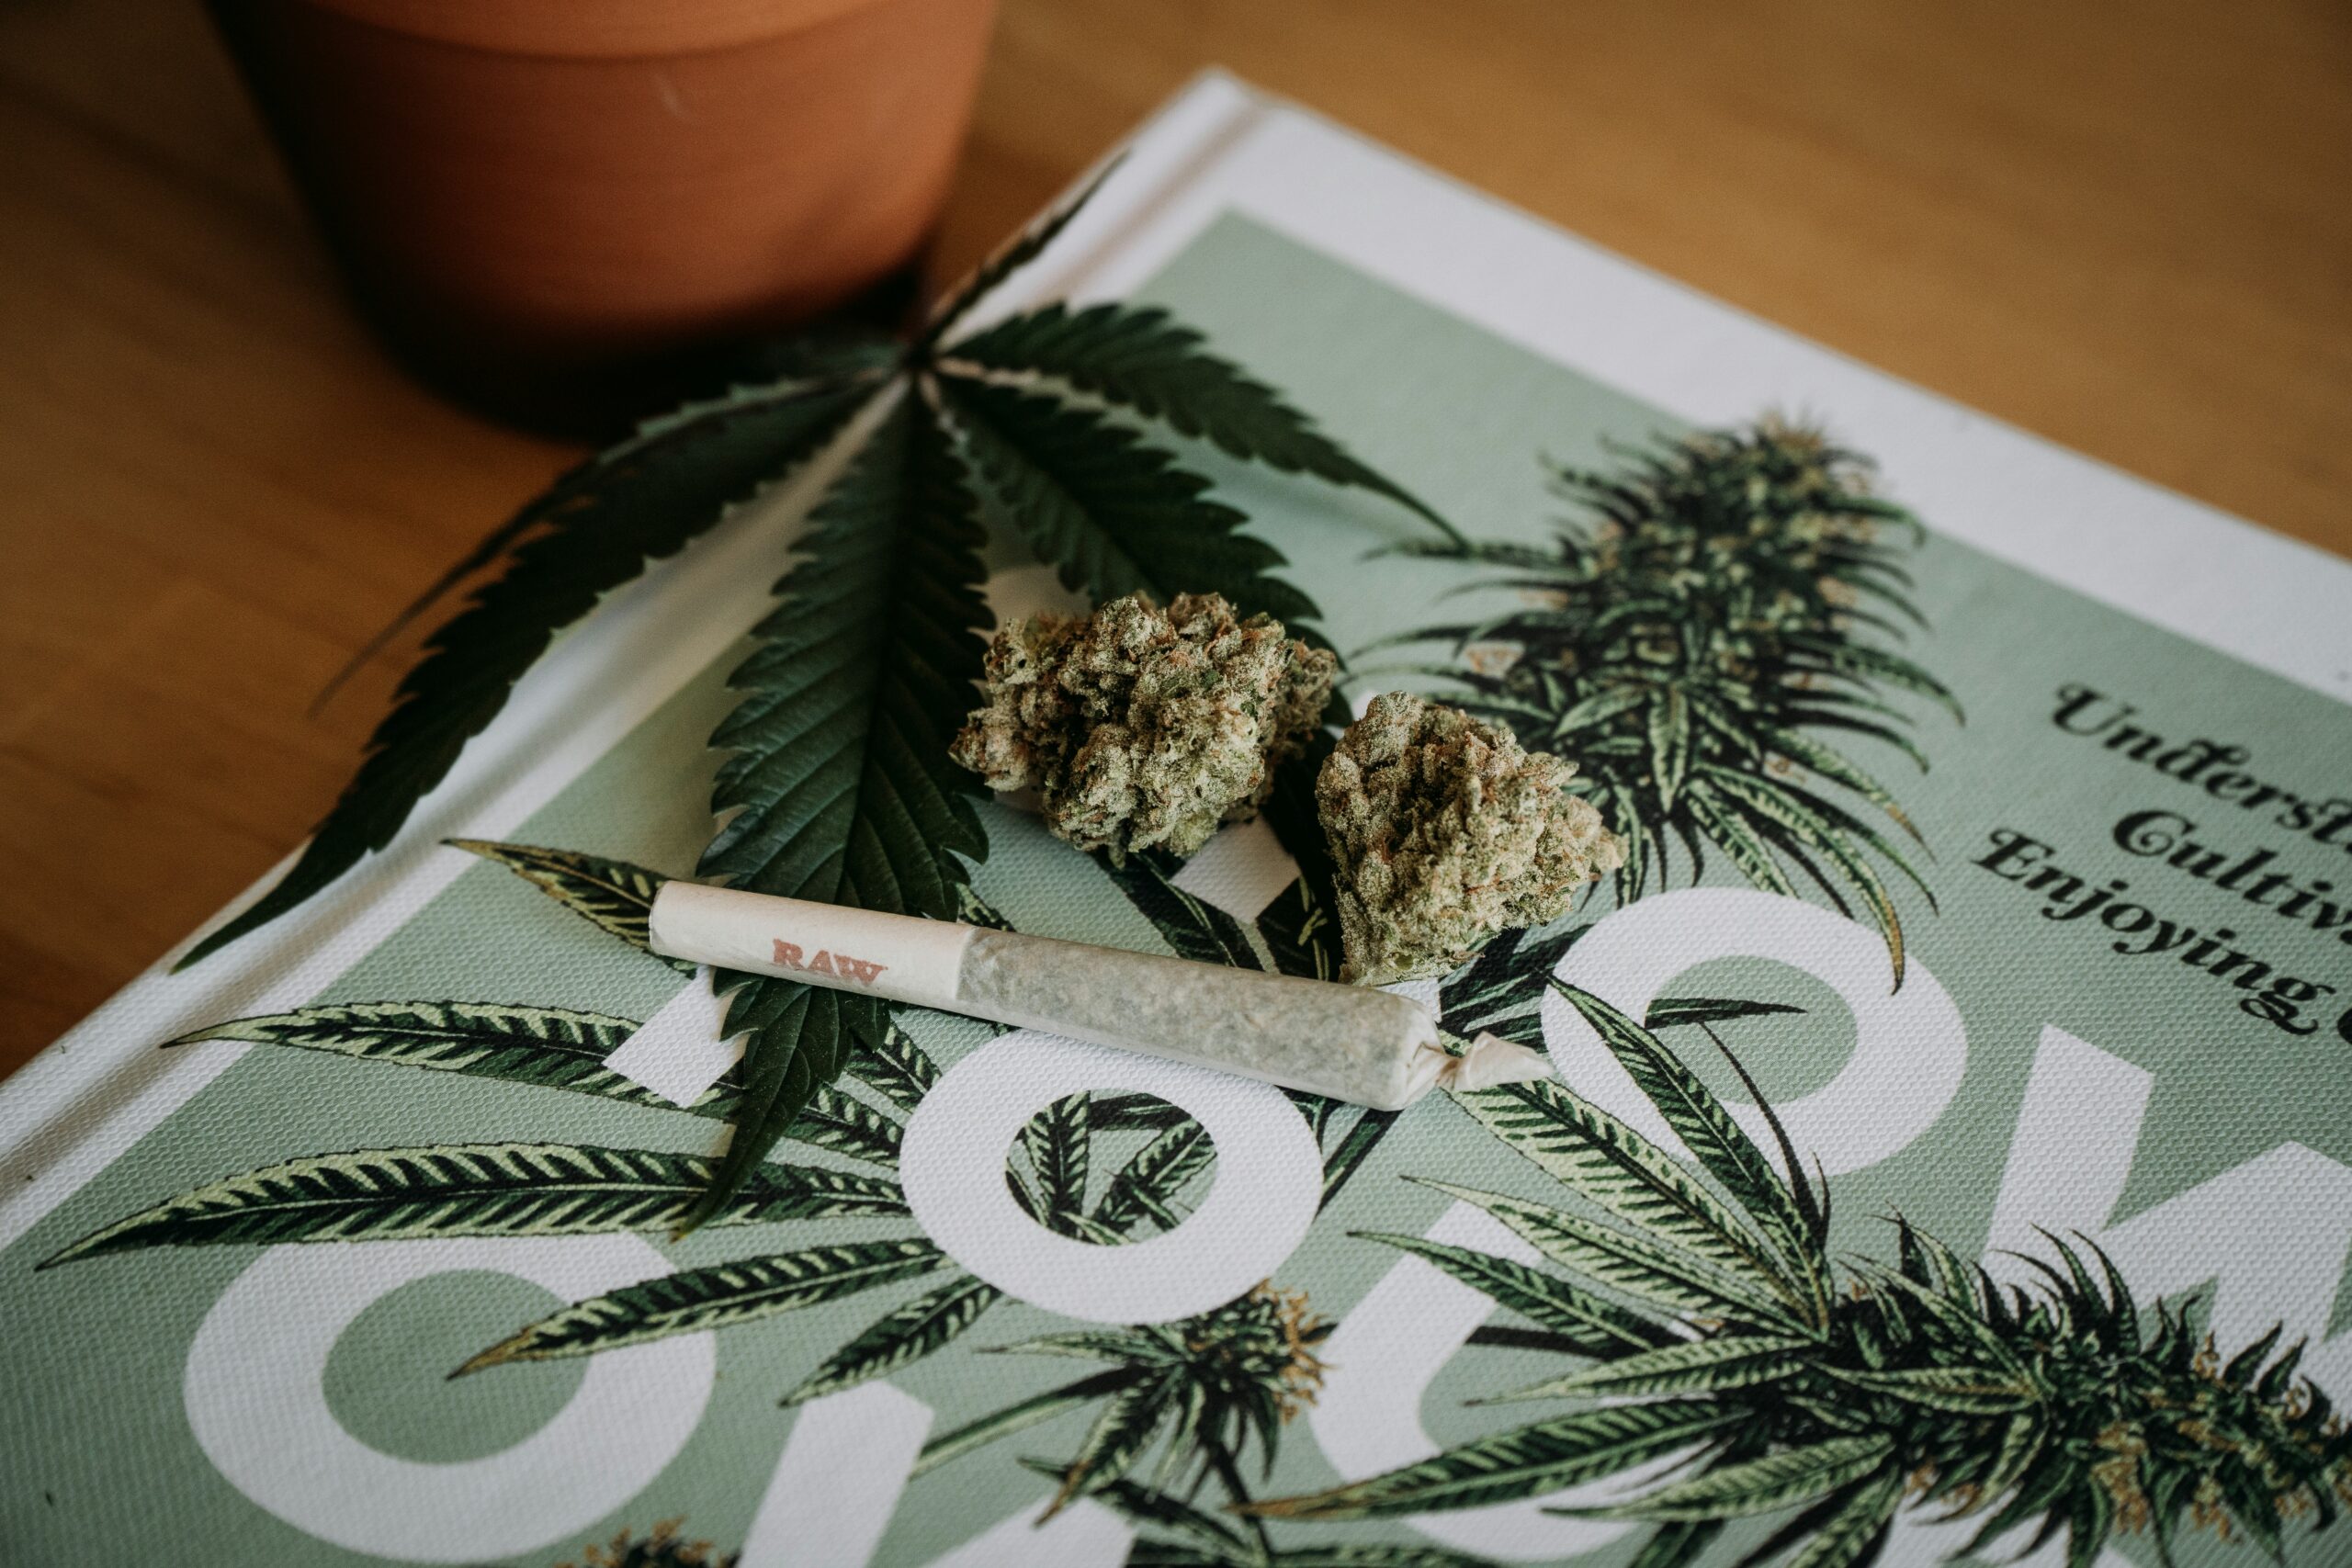 A Cannabis Spliff on a magazine rolled in RAW rolling paper